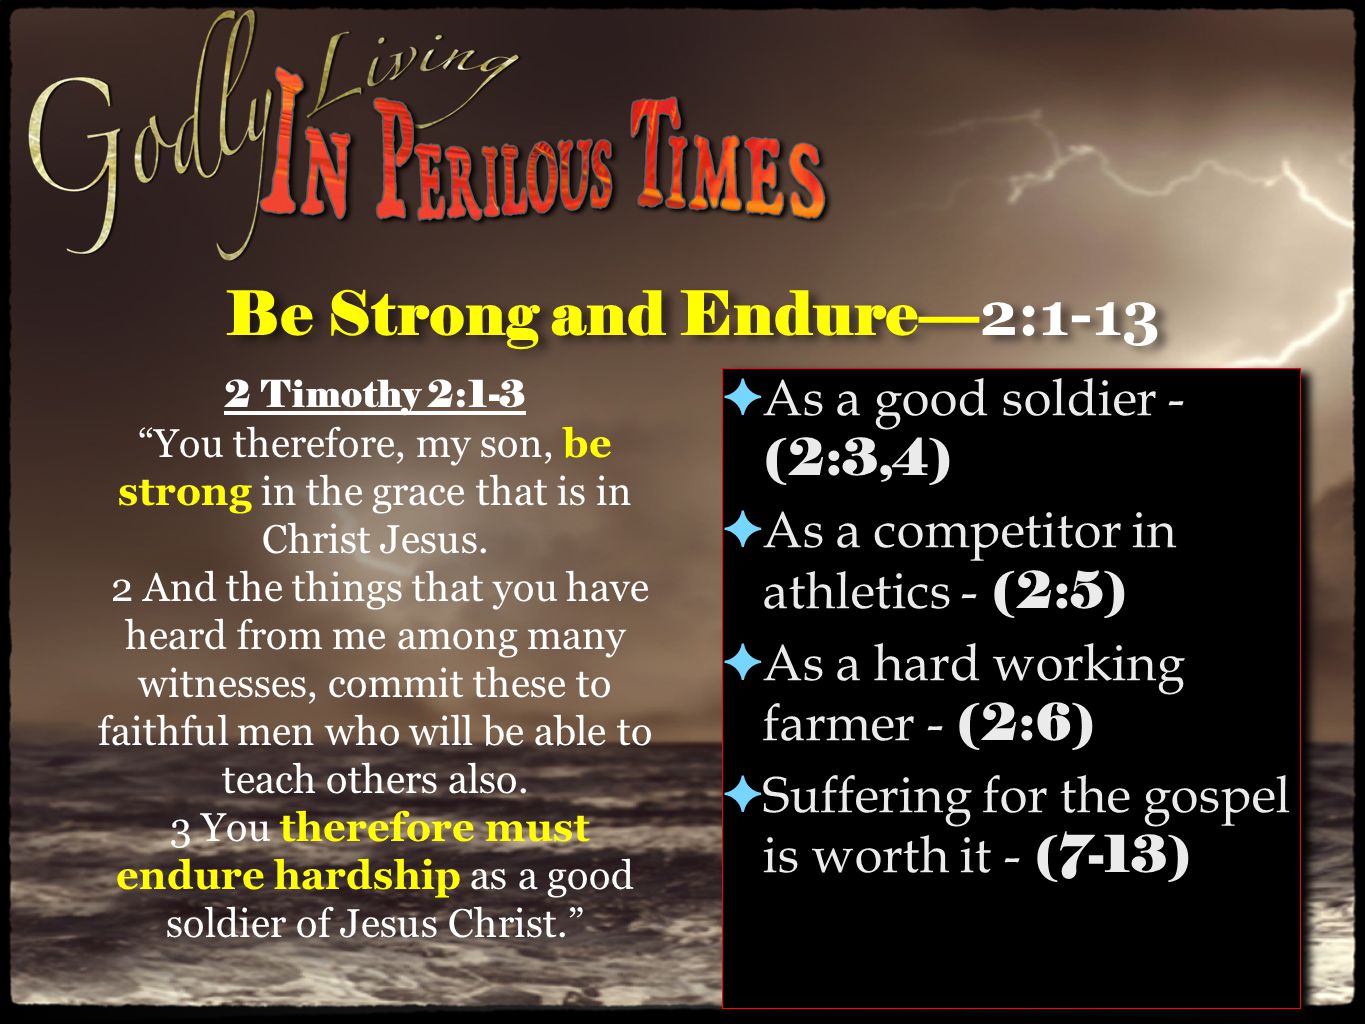 Be Strong and Endure— 2:1-13 ✦ As a good soldier - (2:3,4) ✦ As a competitor in athletics - (2:5) ✦ As a hard working farmer - (2:6) ✦ Suffering for the gospel is worth it - (7-13) ✦ As a good soldier - (2:3,4) ✦ As a competitor in athletics - (2:5) ✦ As a hard working farmer - (2:6) ✦ Suffering for the gospel is worth it - (7-13) 2 Timothy 2:1-3 You therefore, my son, be strong in the grace that is in Christ Jesus.